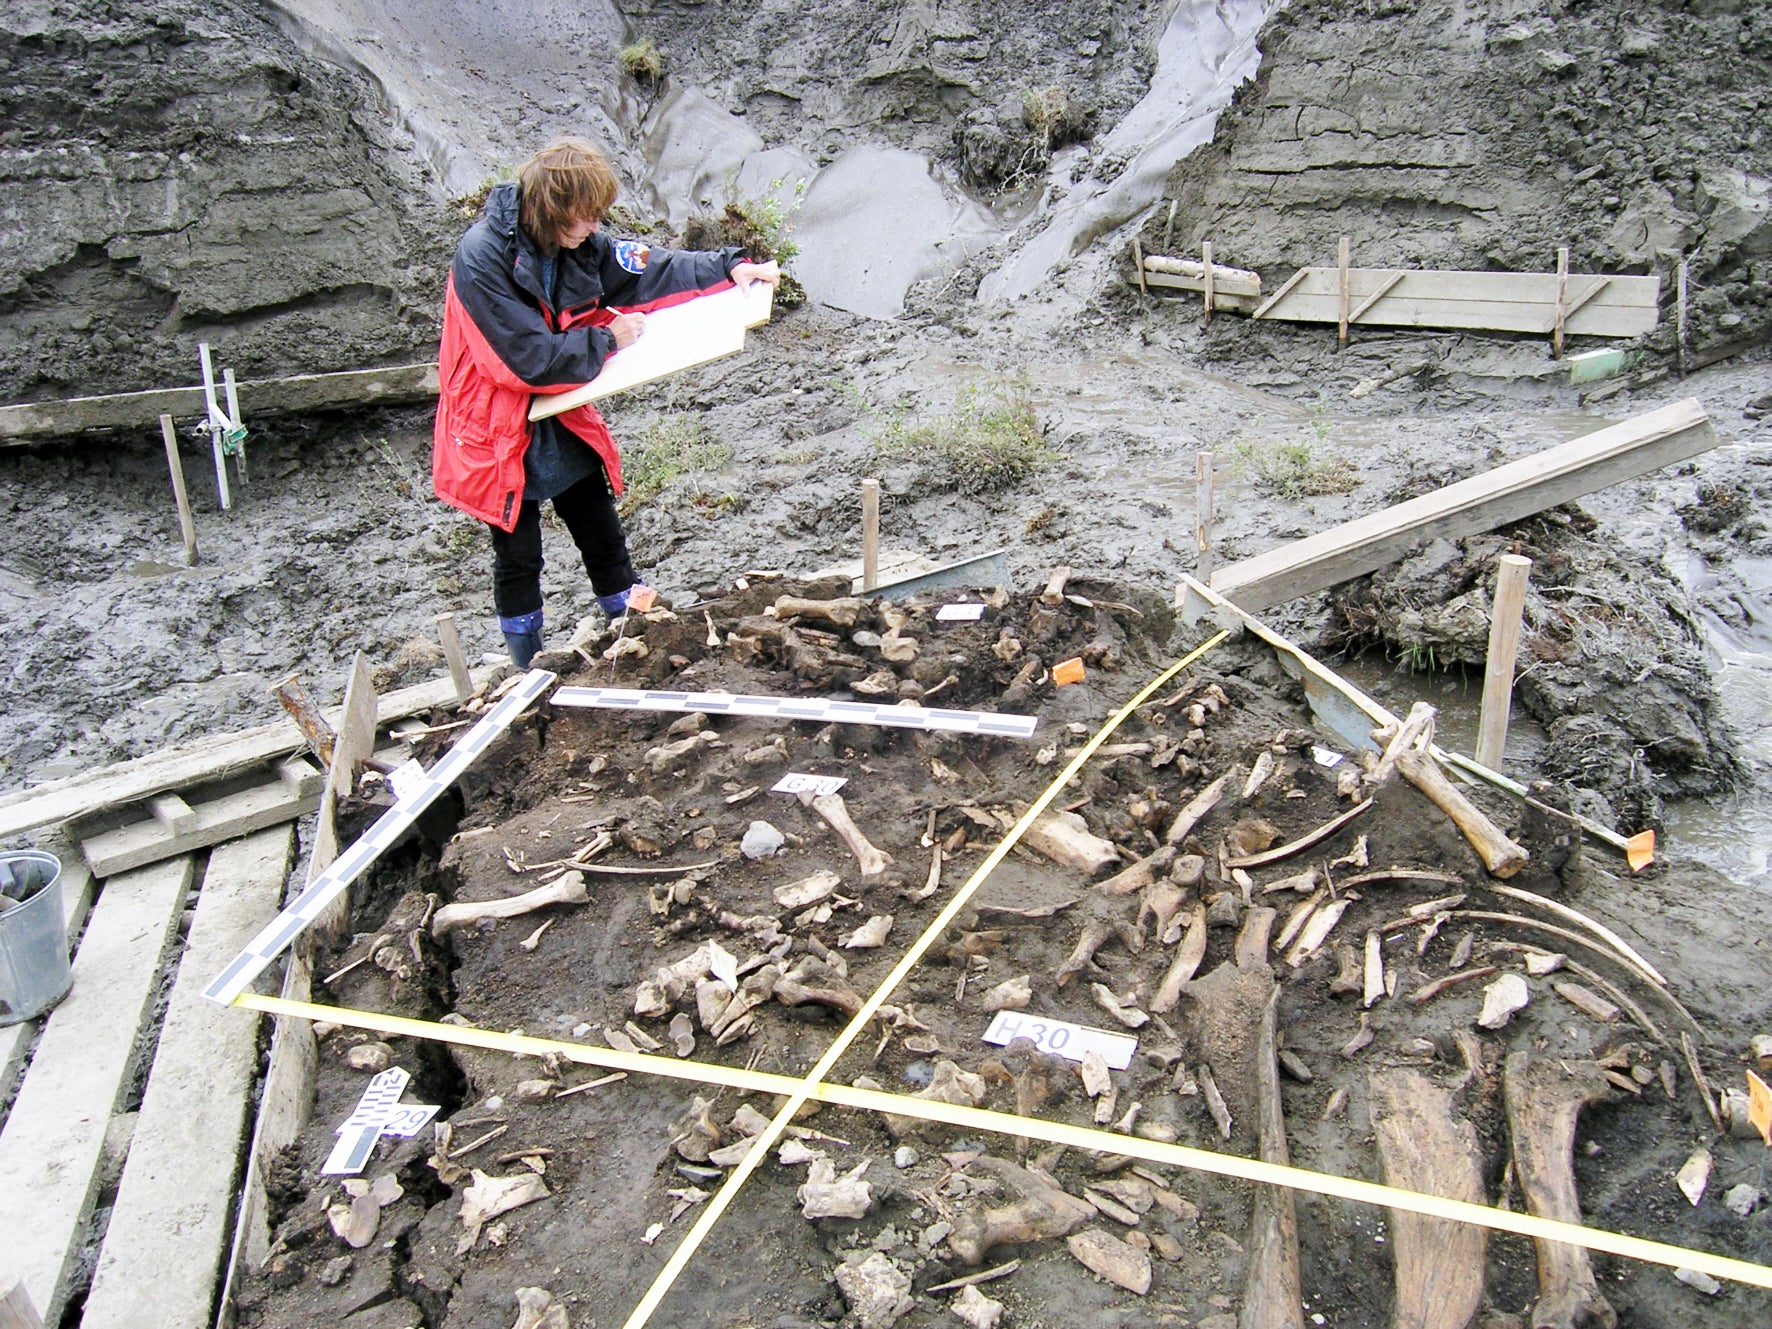 The site where the teeth were found (pictured) is near the Yana River in northern Russia